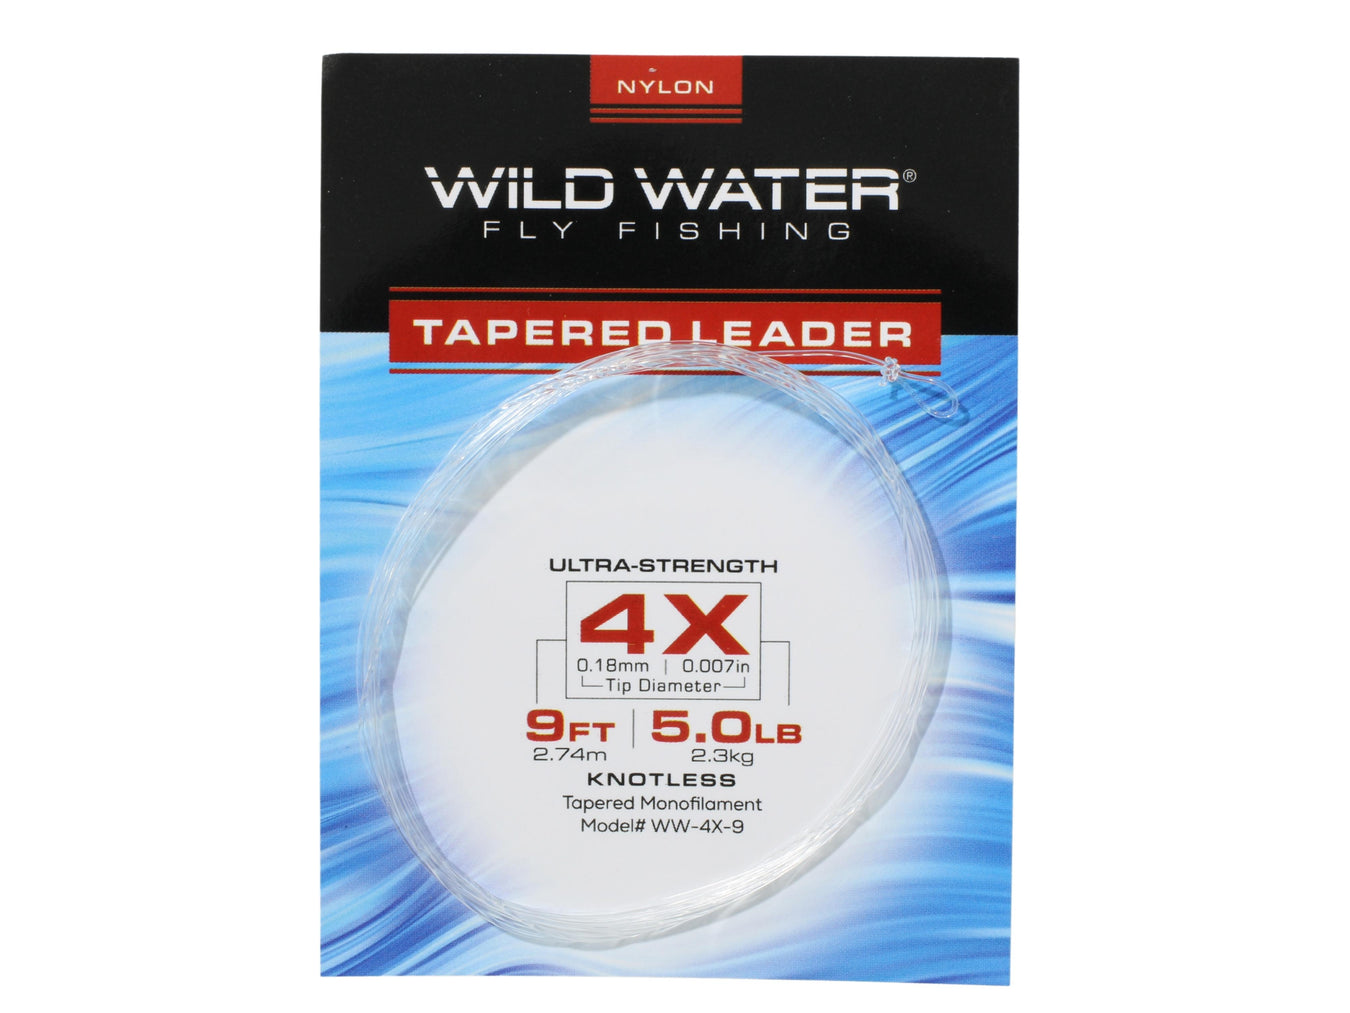 Wild Water Fly Fishing 4X Leaders